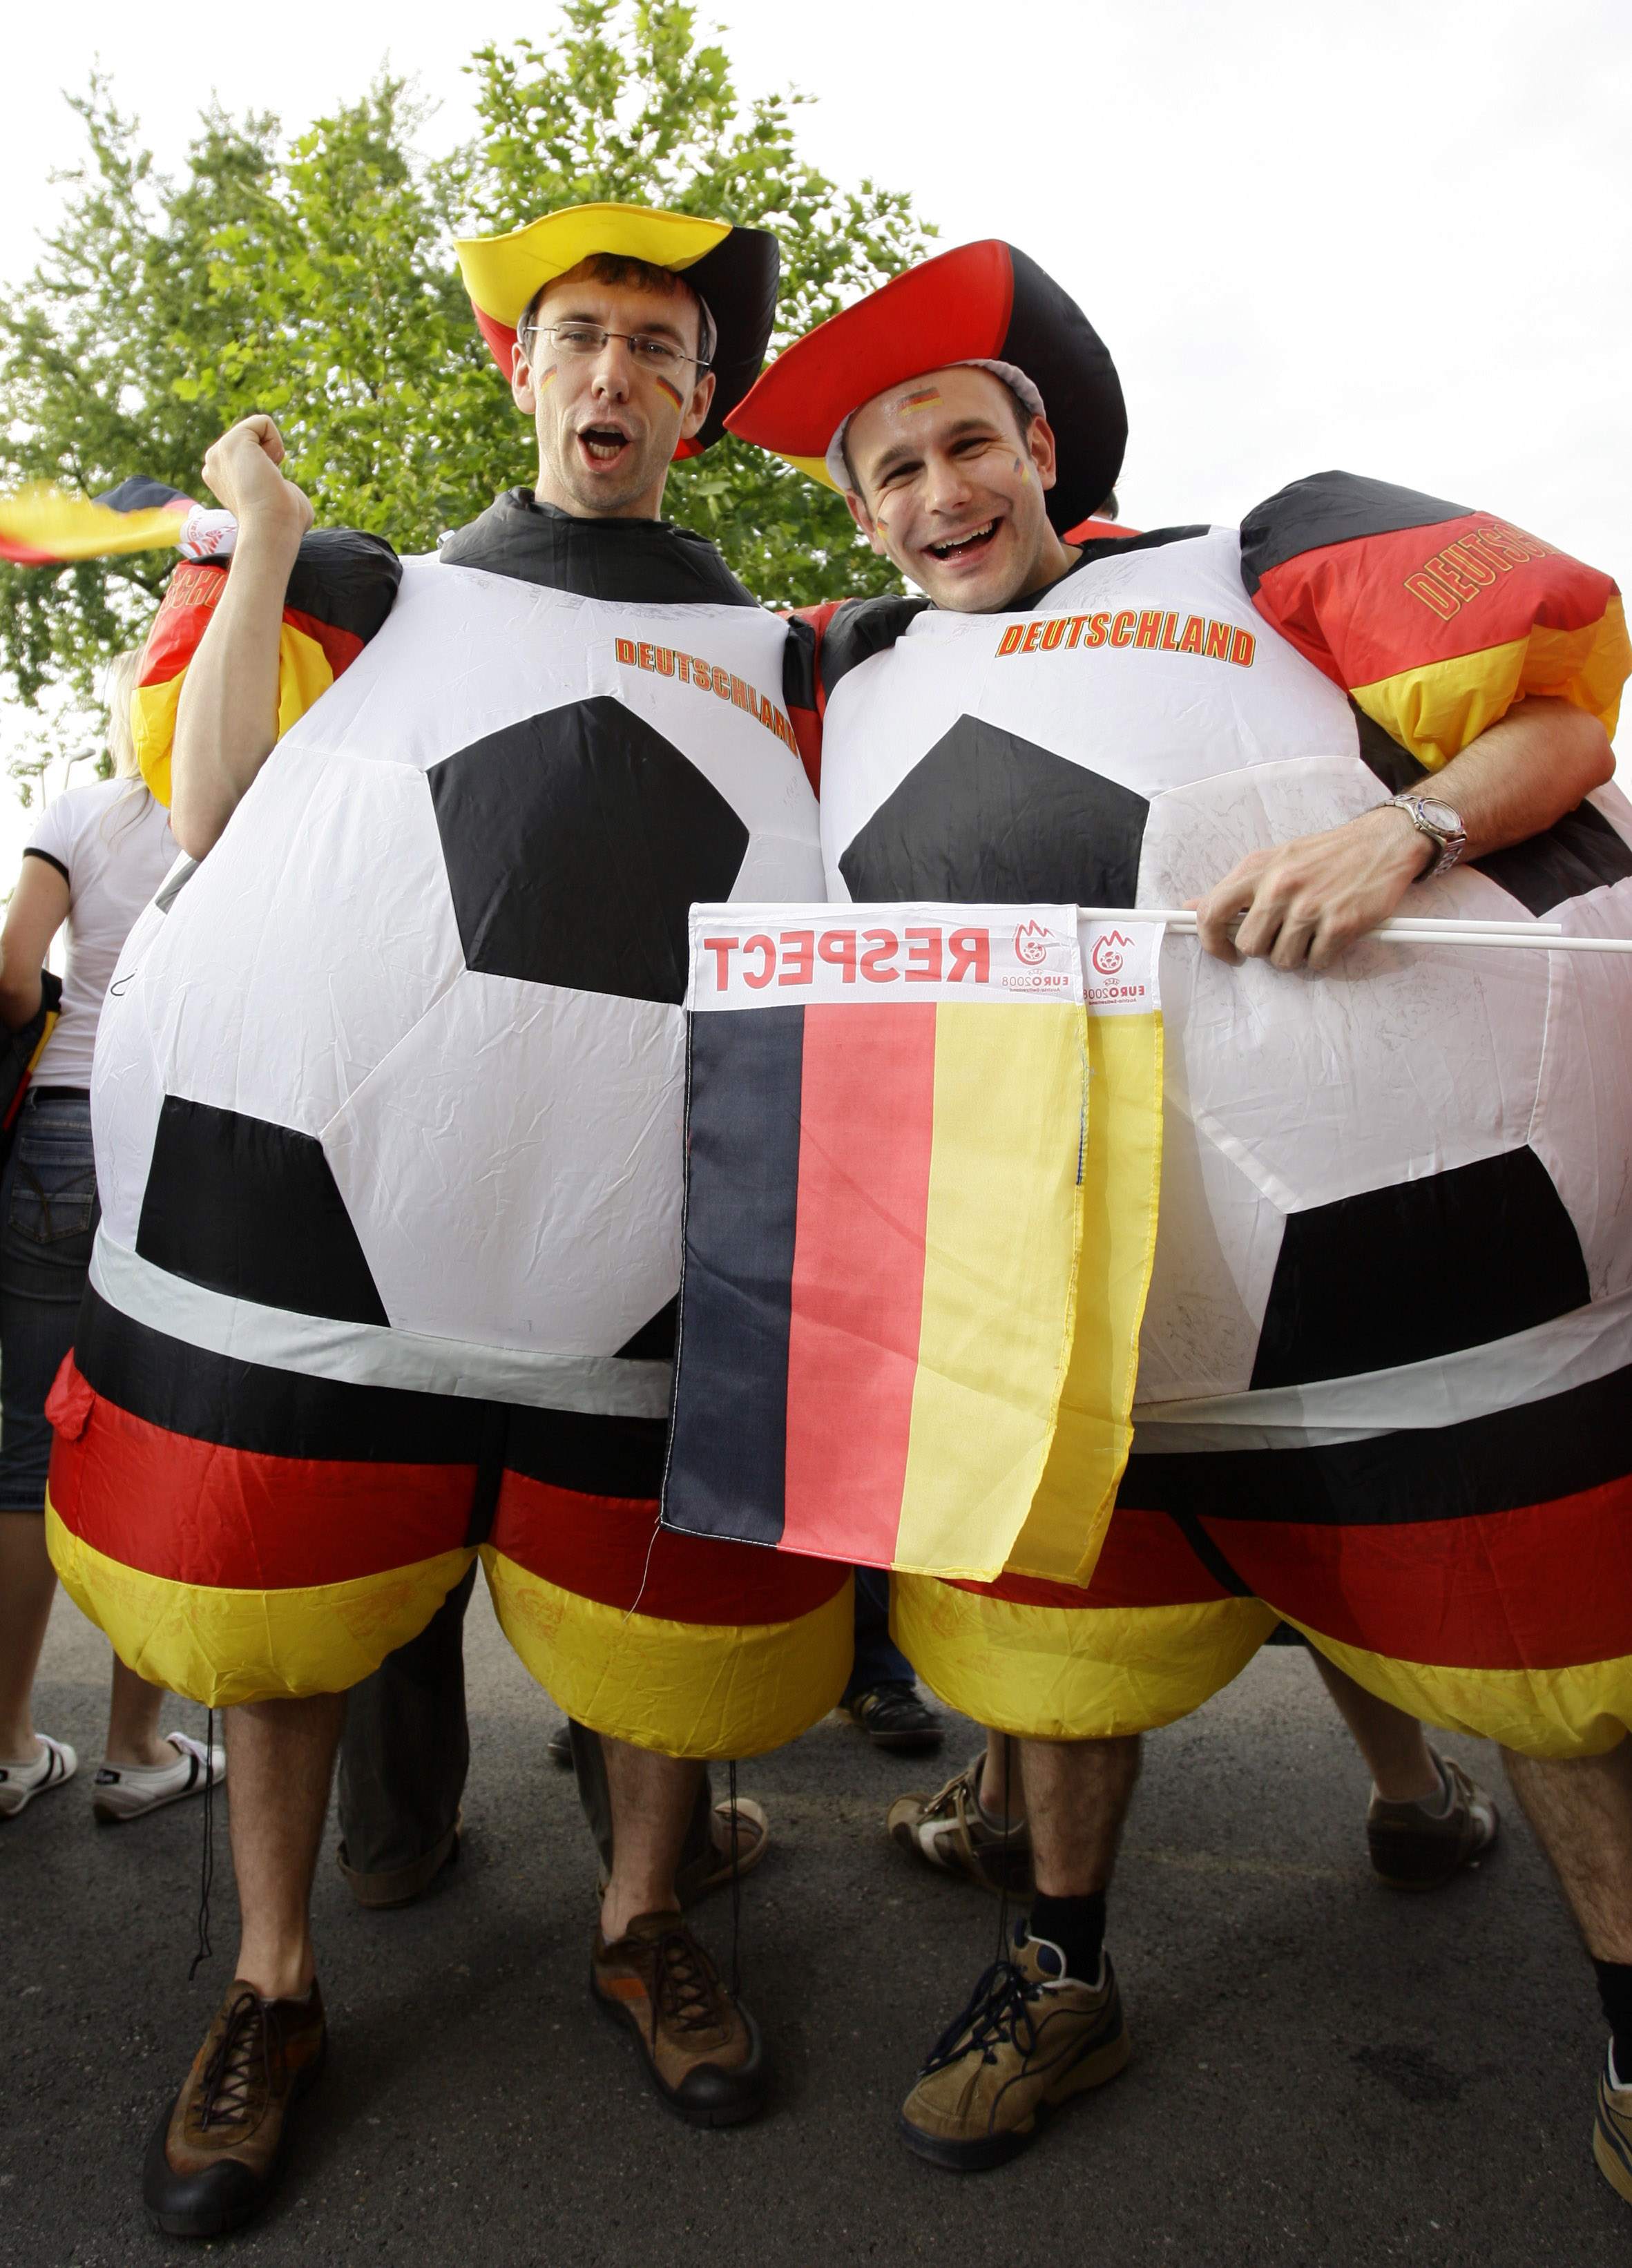 Fans at Euro 2008 soccer match